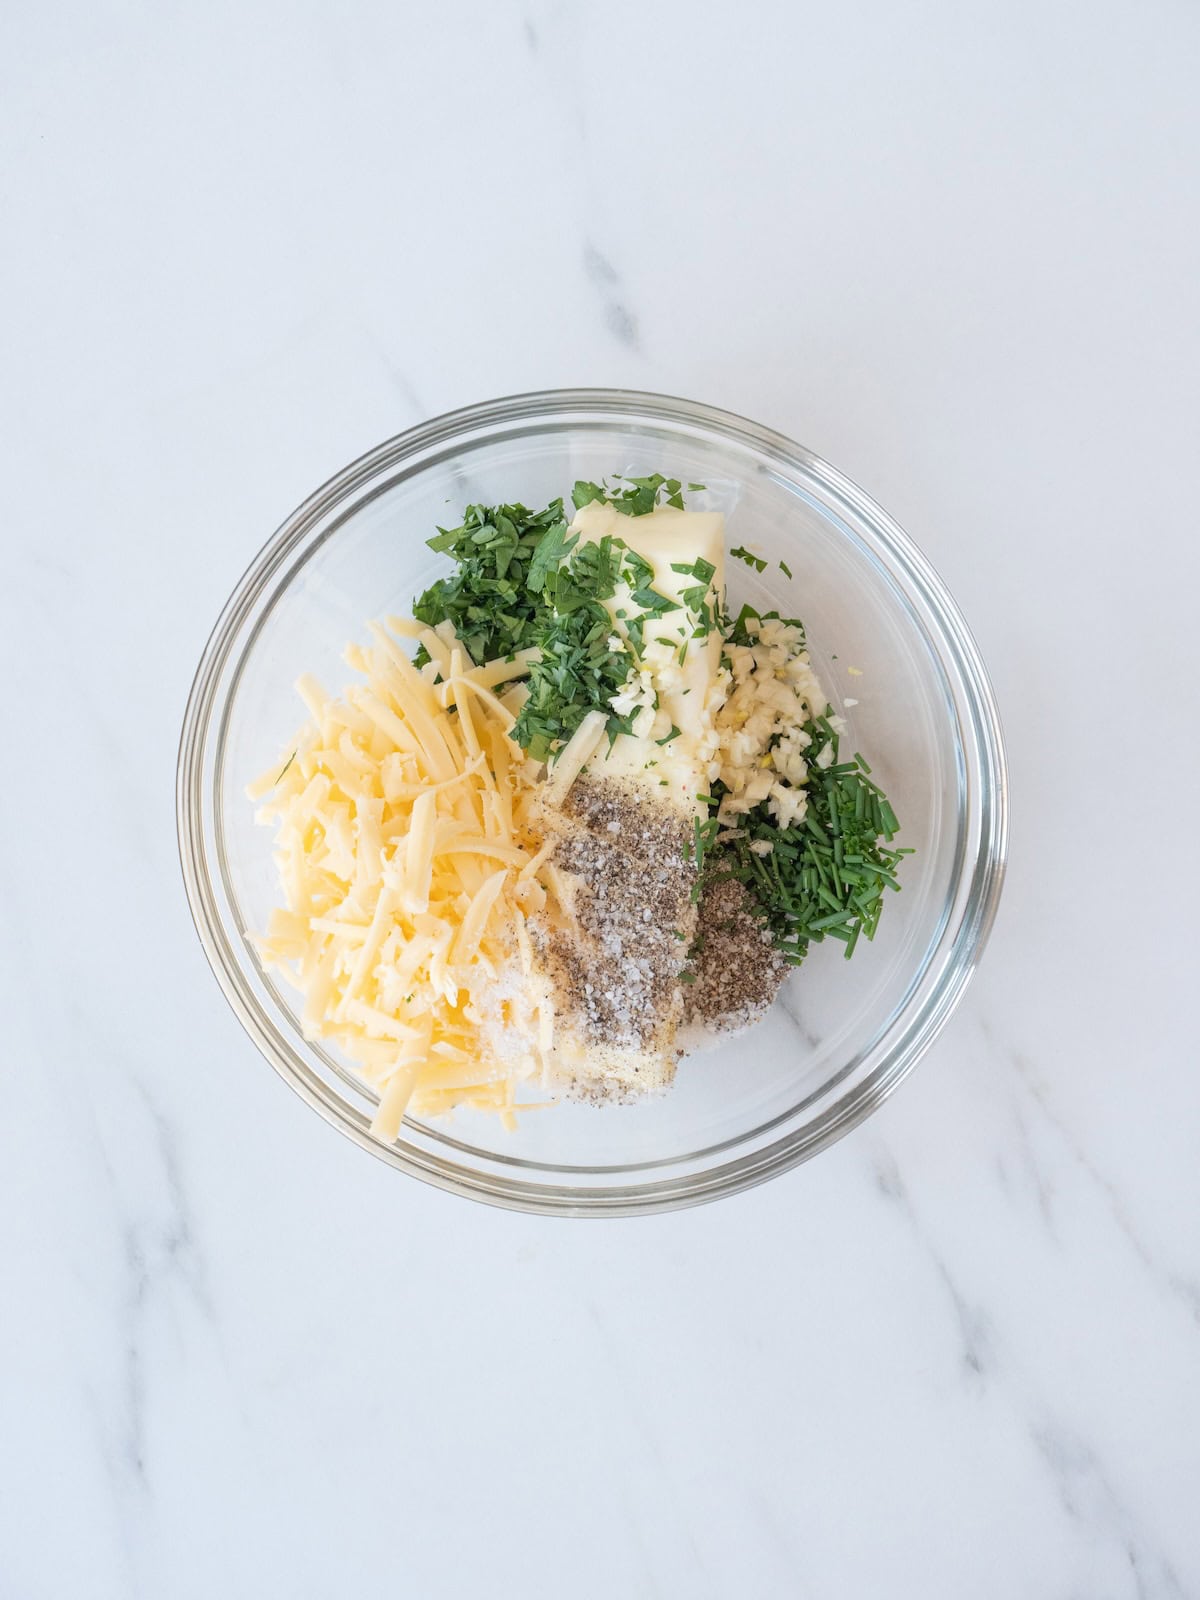 A glass mixing bowl with ingredients to make compound butter, which are butter, finely chopped parsley, chopped chives, chopped garlic, shredded cheese, salt and pepper.